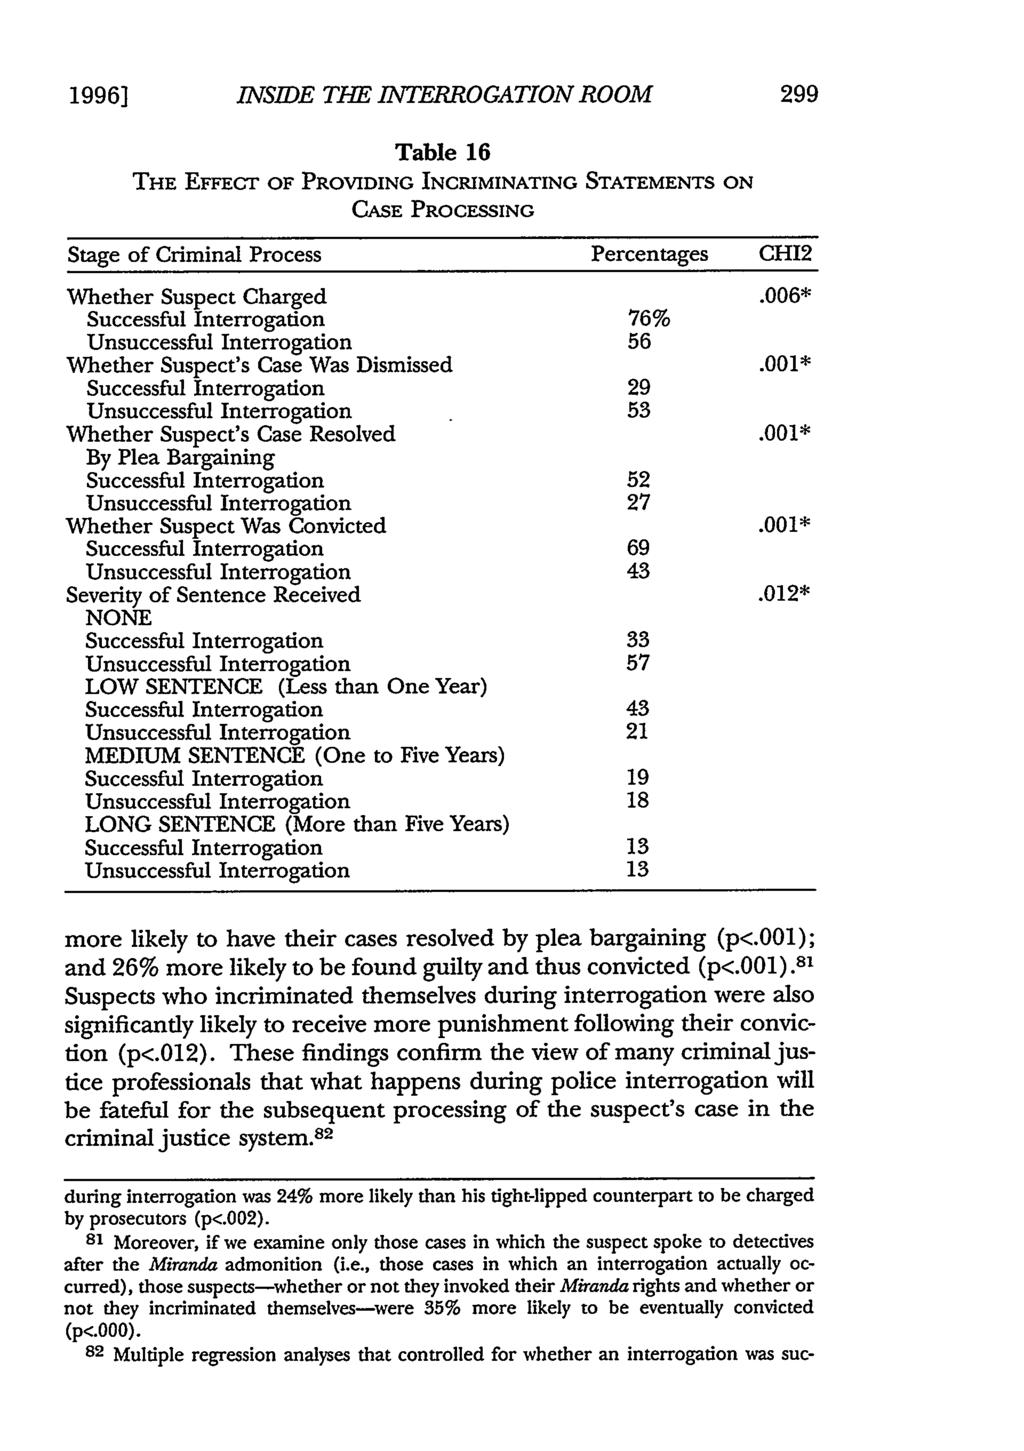 1996] VINSIDE THE INTERROGATION ROOM Table 16 THE EFFECT OF PROVIDING INCRIMINATING STATEMENTS ON CASE PROCESSING Stage of Criminal Process Percentages CHI2 Whether Suspect Charged.